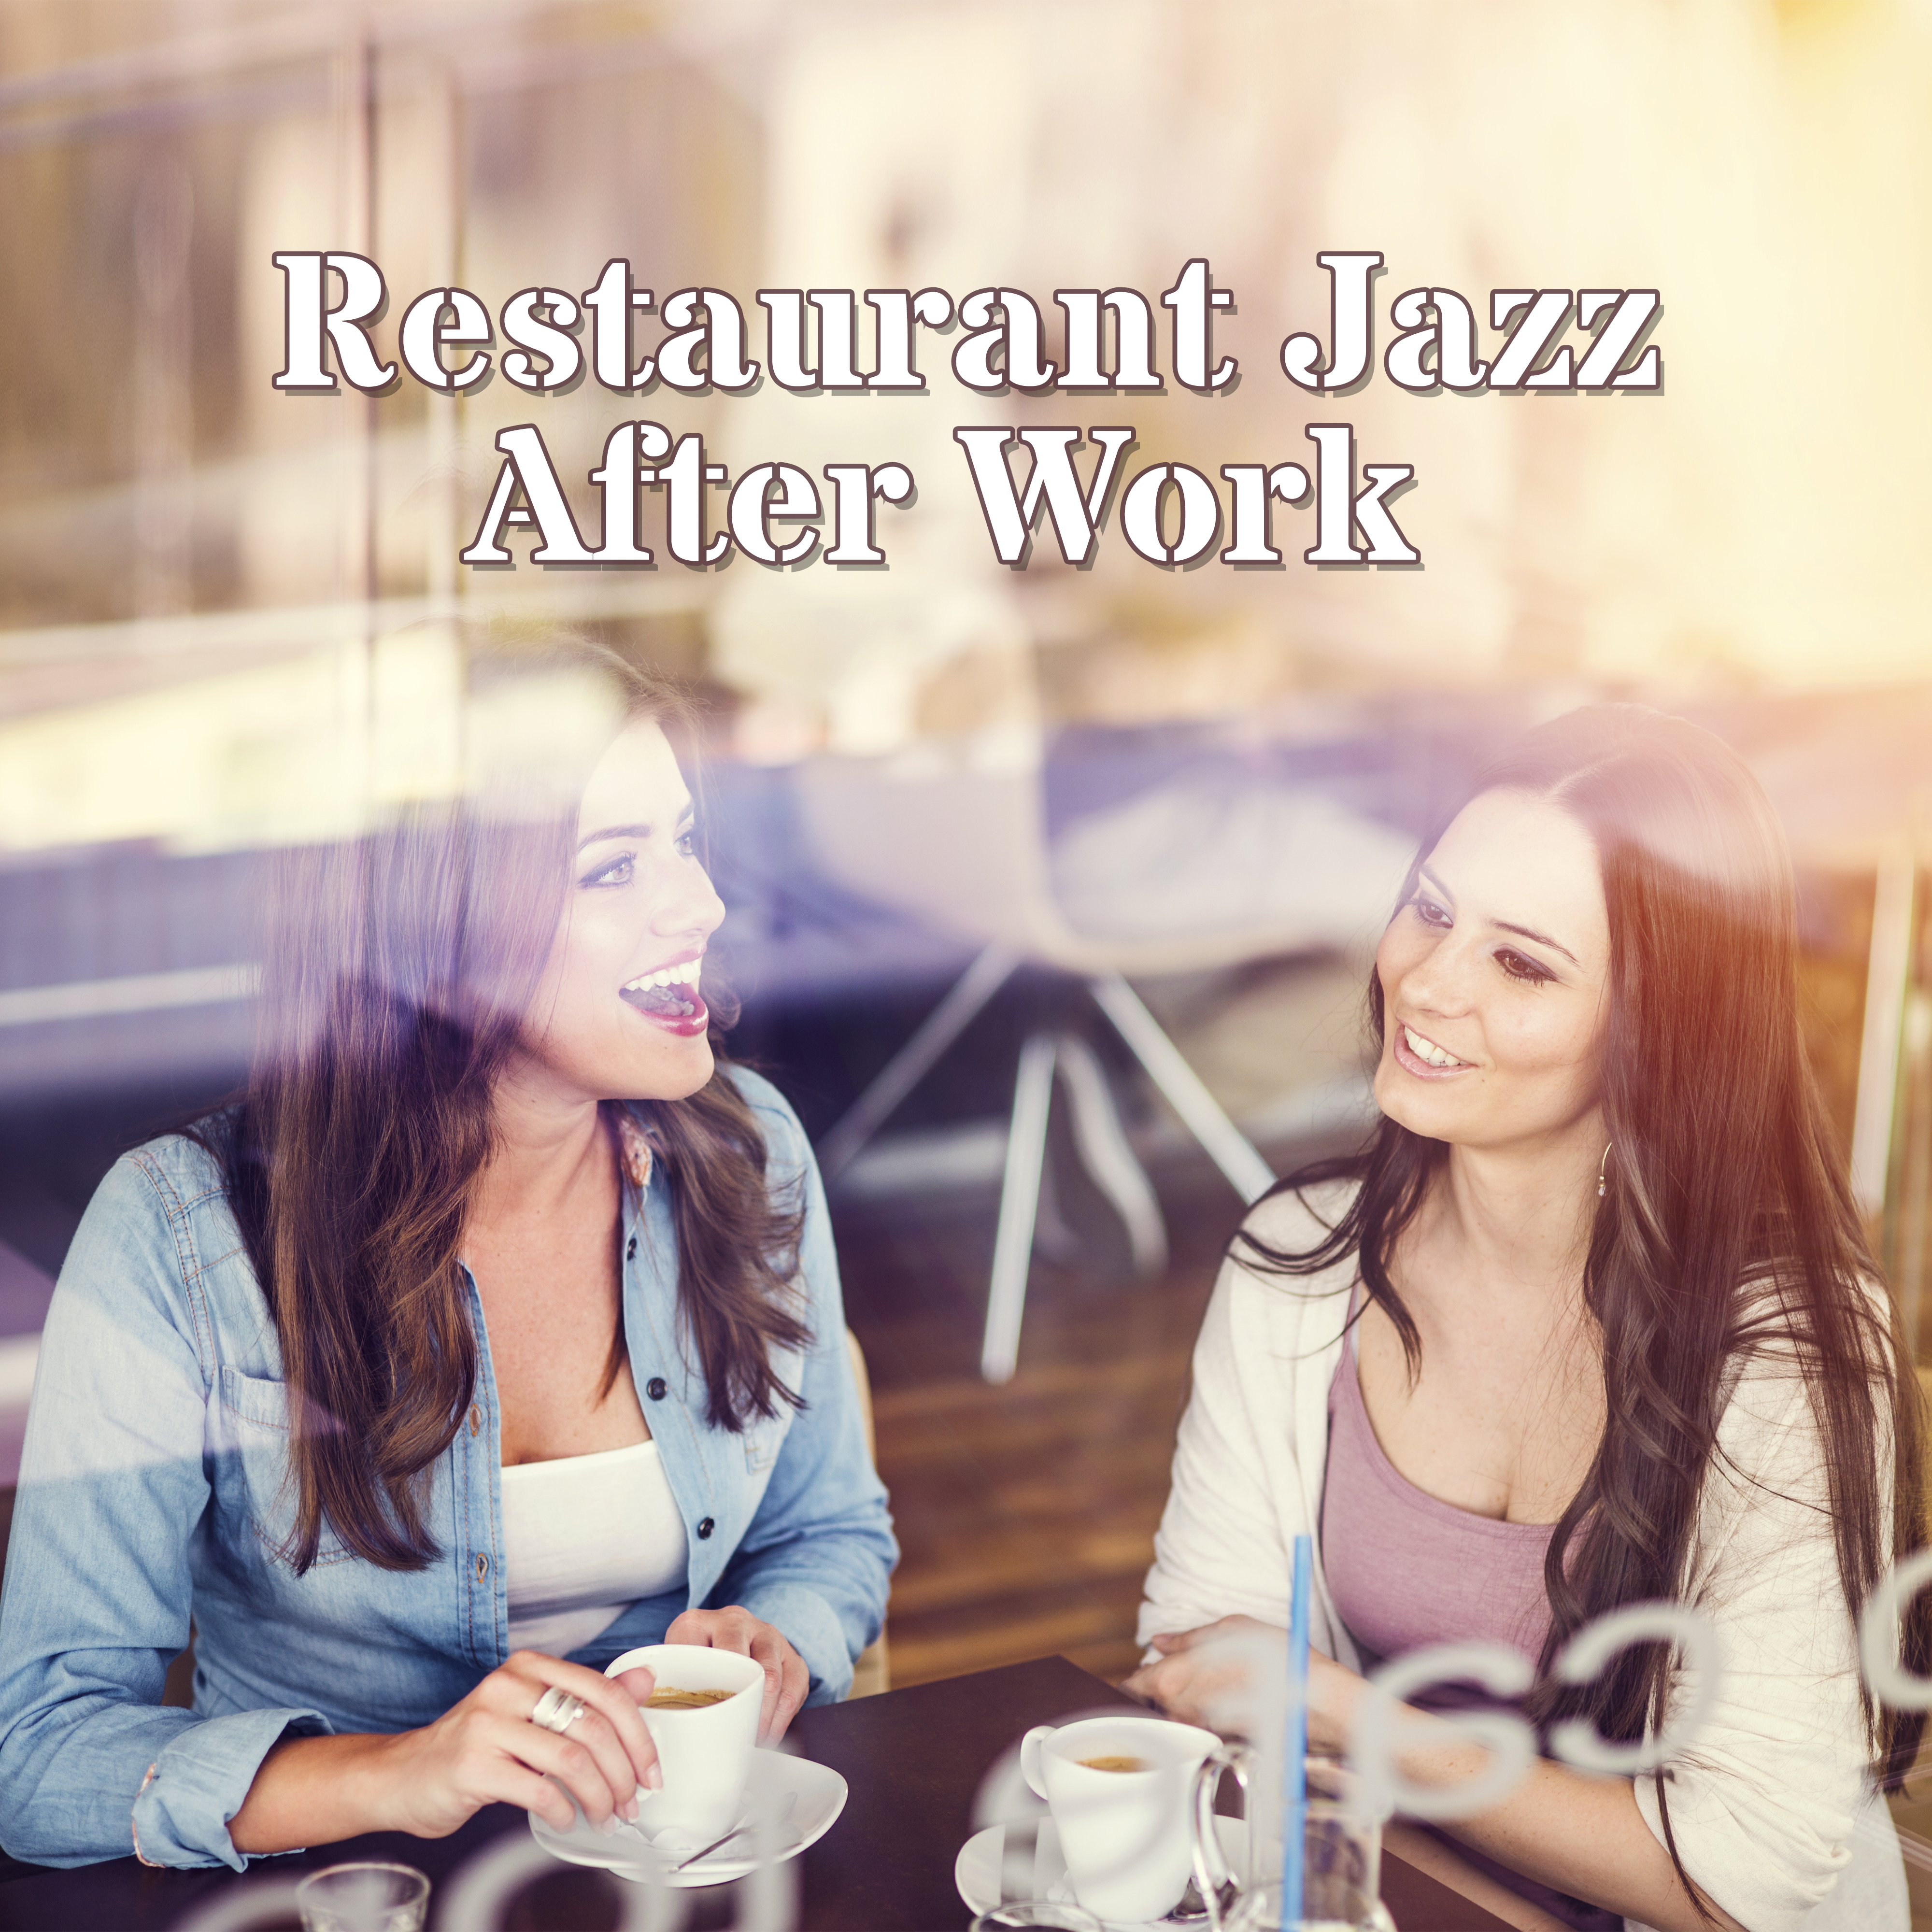 Restaurant Jazz After Work  Music for Relaxation, Calm Piano Music, Peaceful Jazz, Cafe  Relax in Restaurant